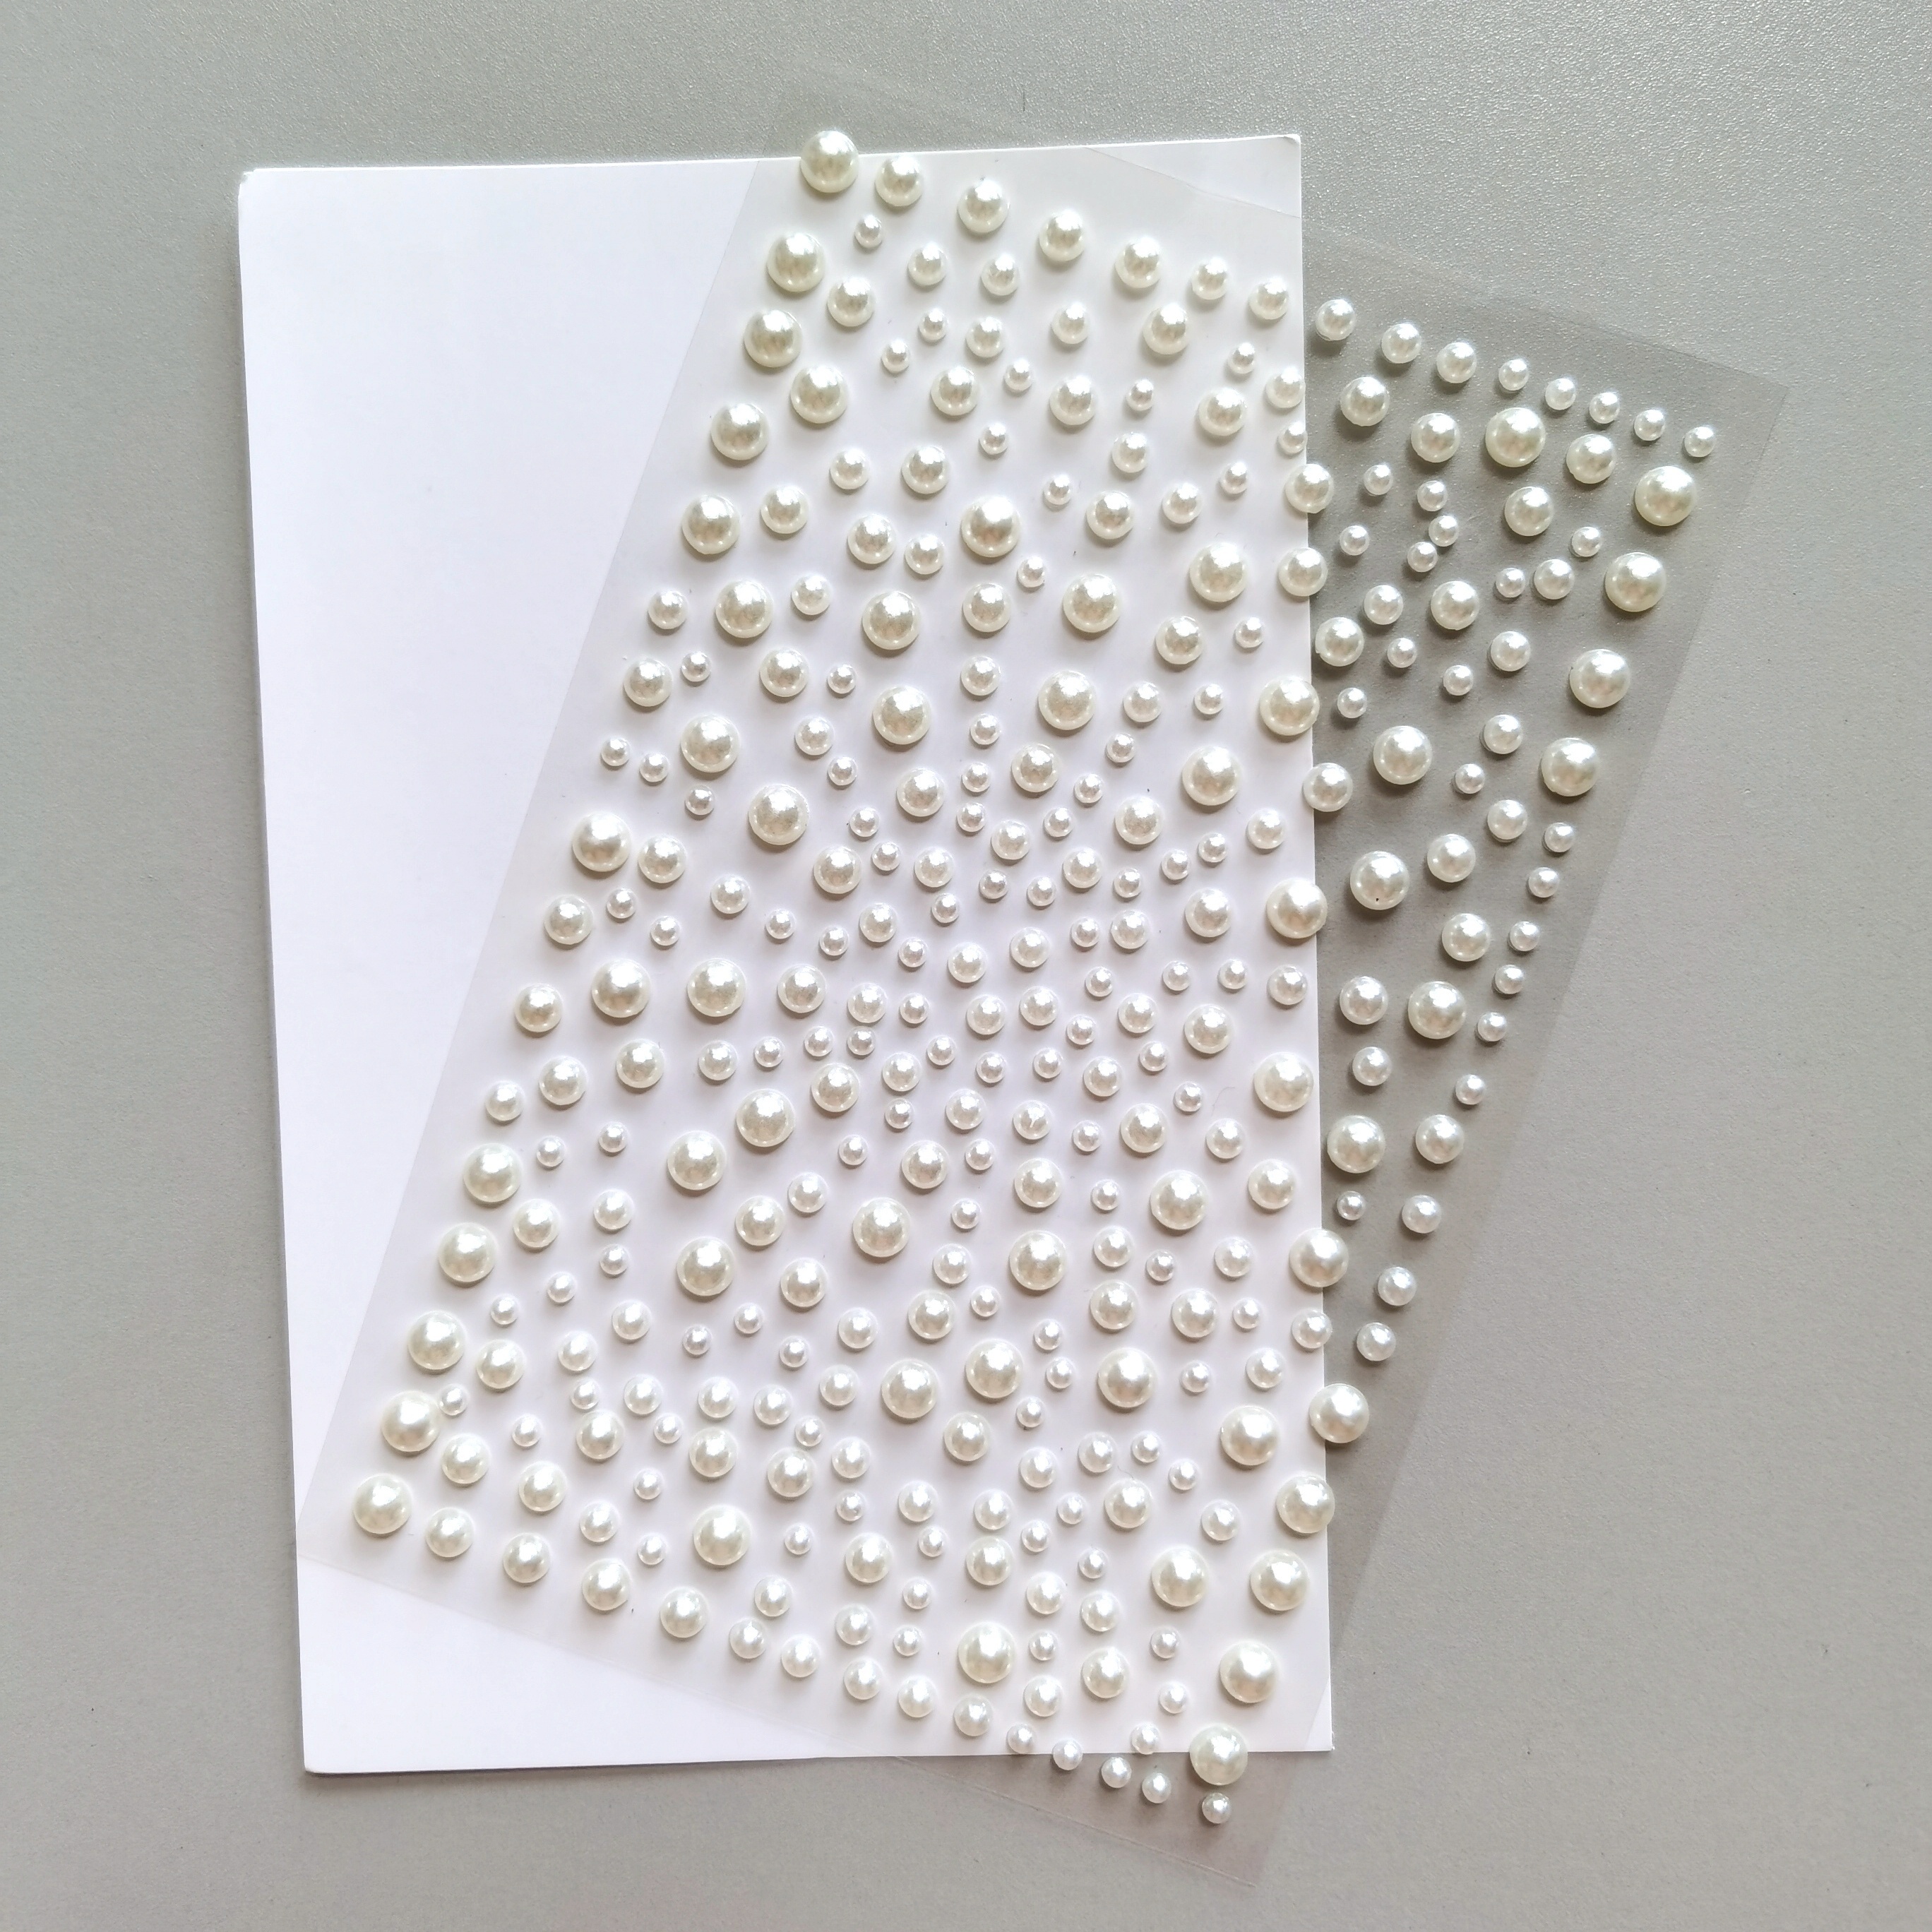 165pcs Mix 3/4/5/6mm Hair Pearls Stick On Self Adhesive Pearls